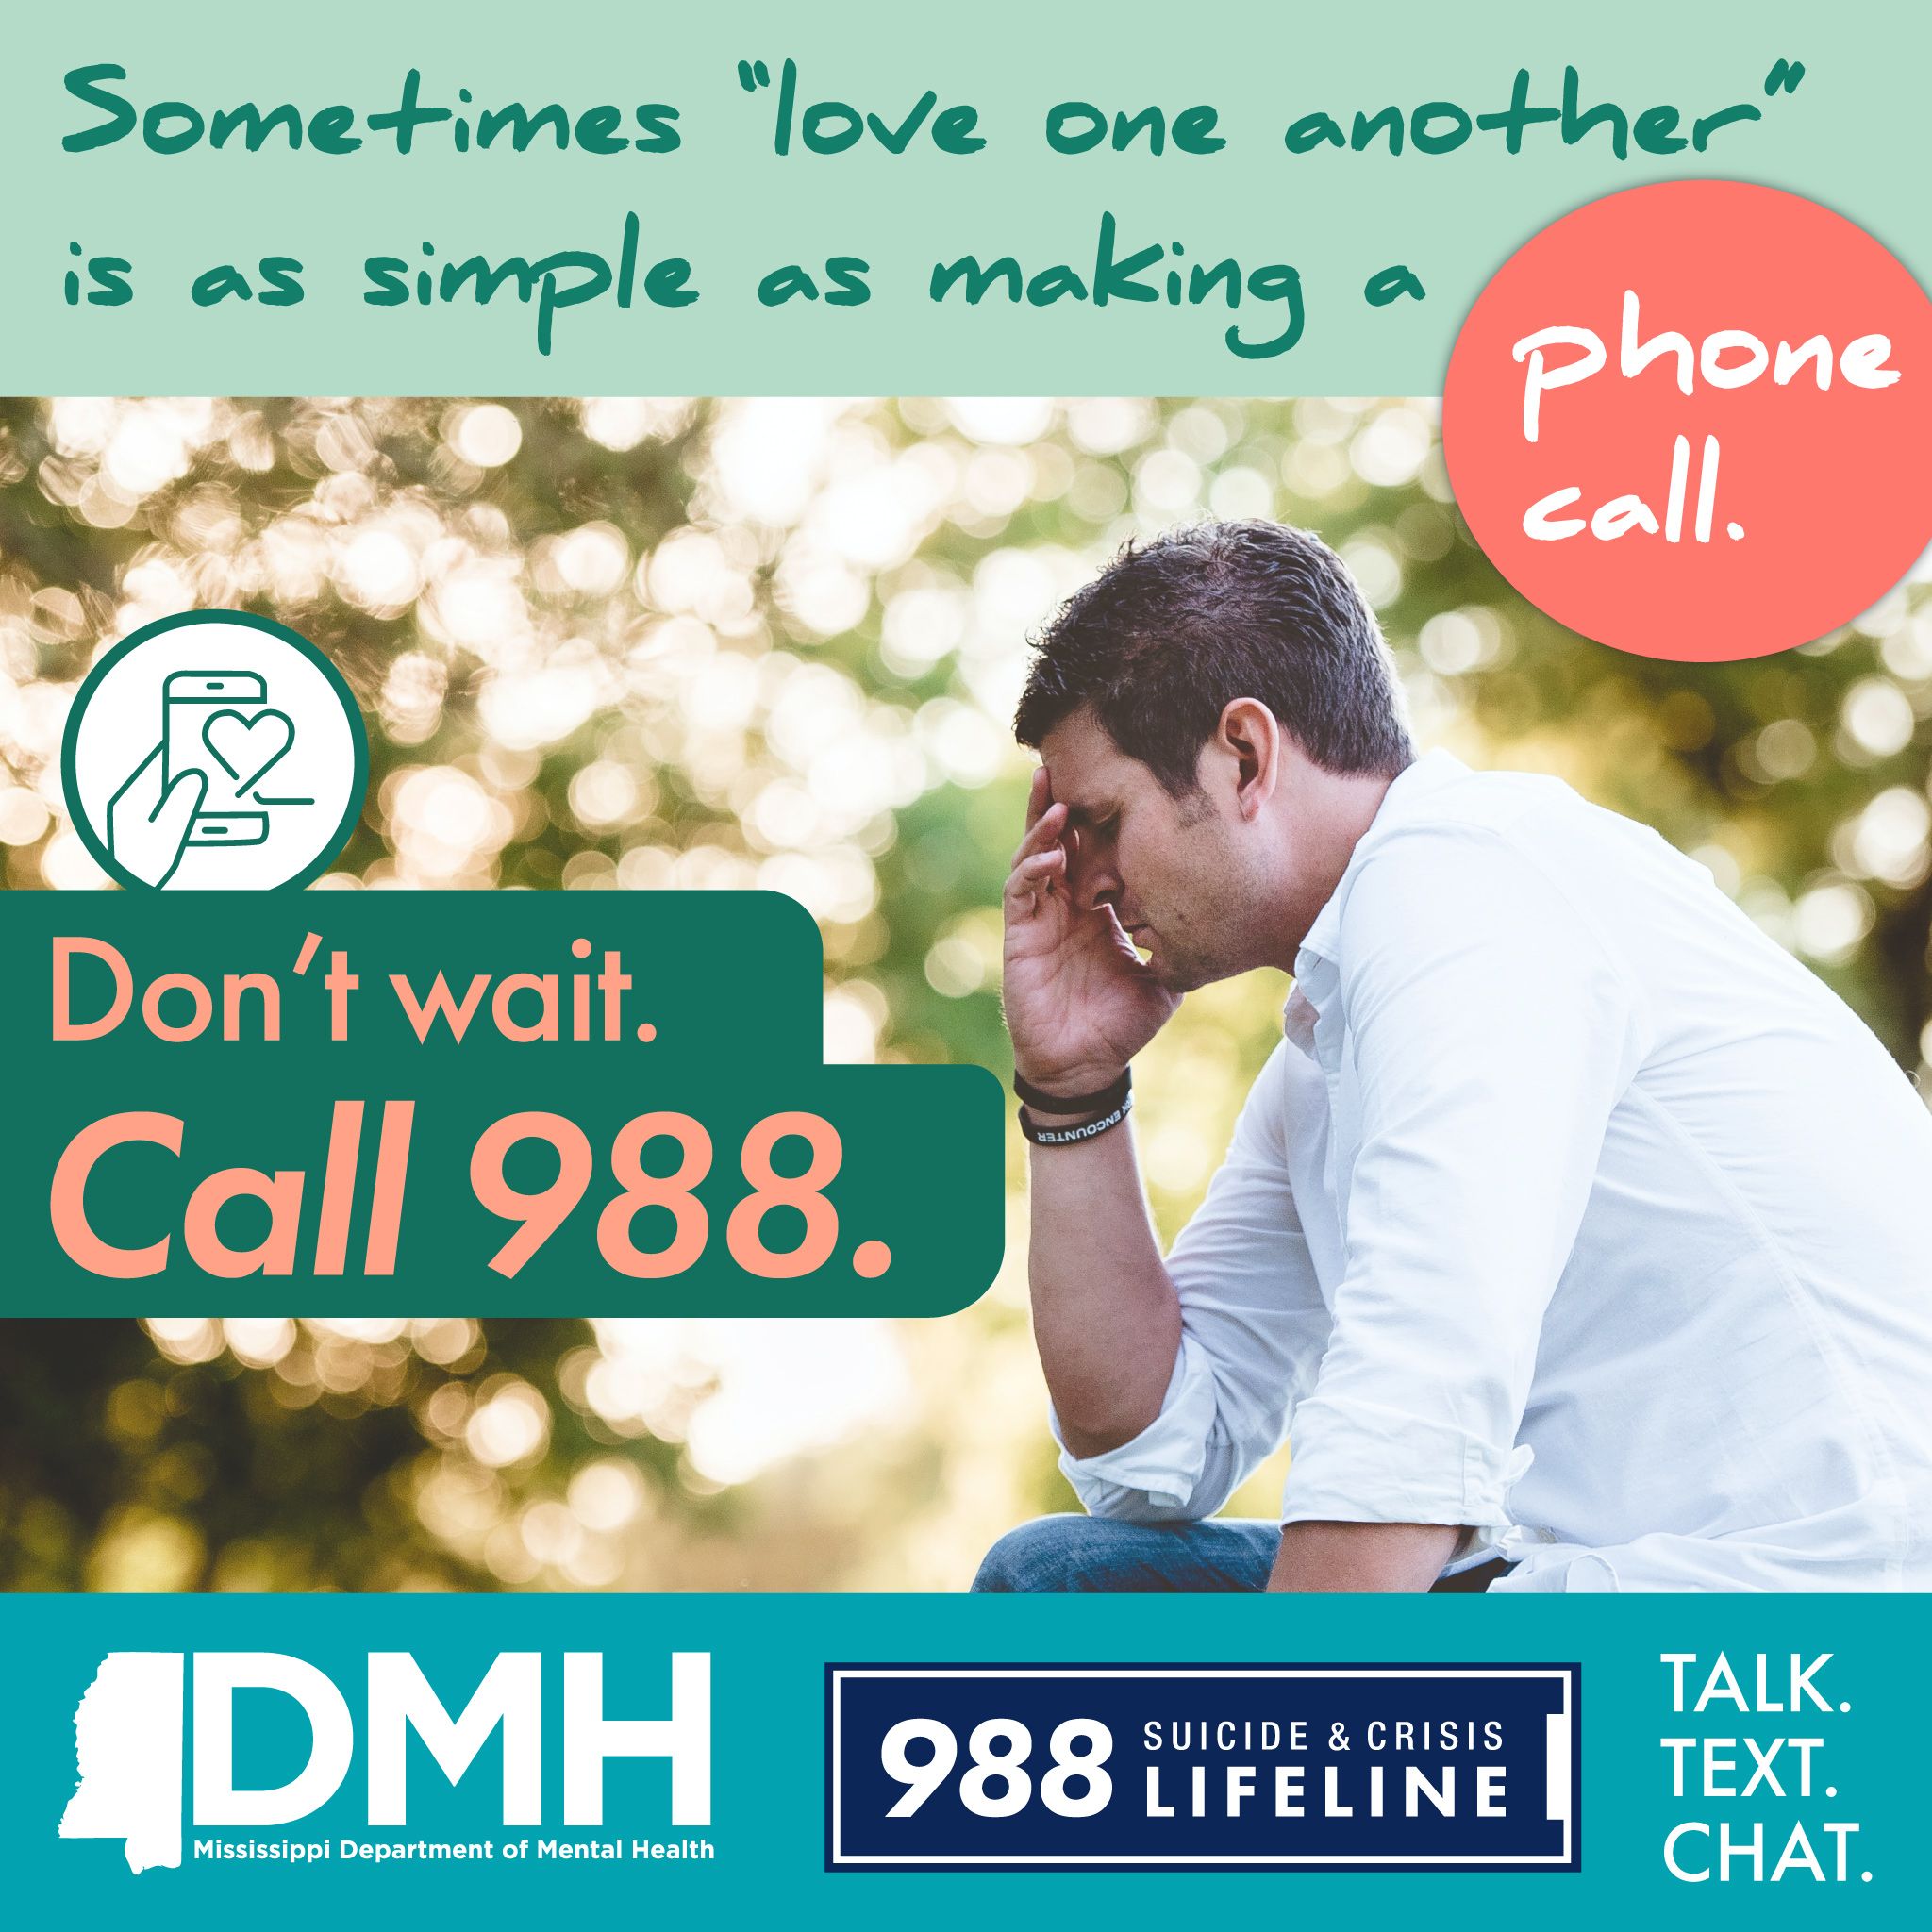 Sometimes "love one another" is as simple as making a phone call.